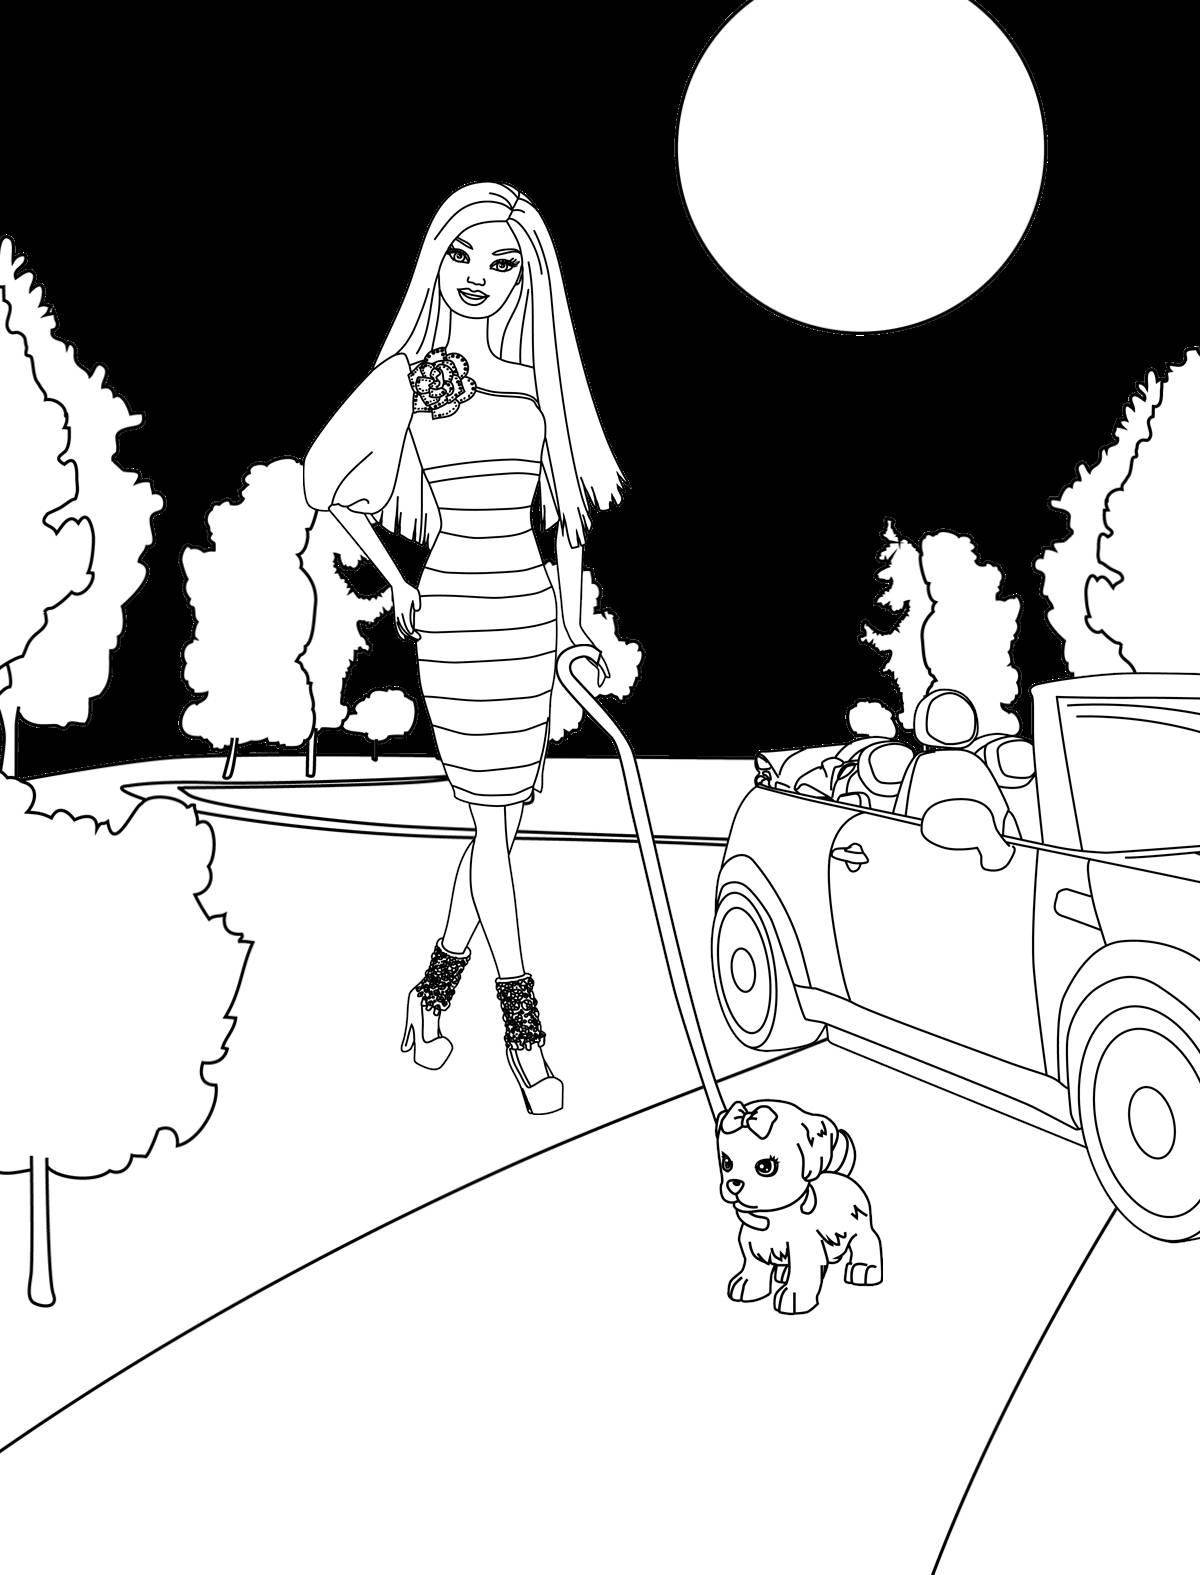 Coloring page joyful barbie in the car